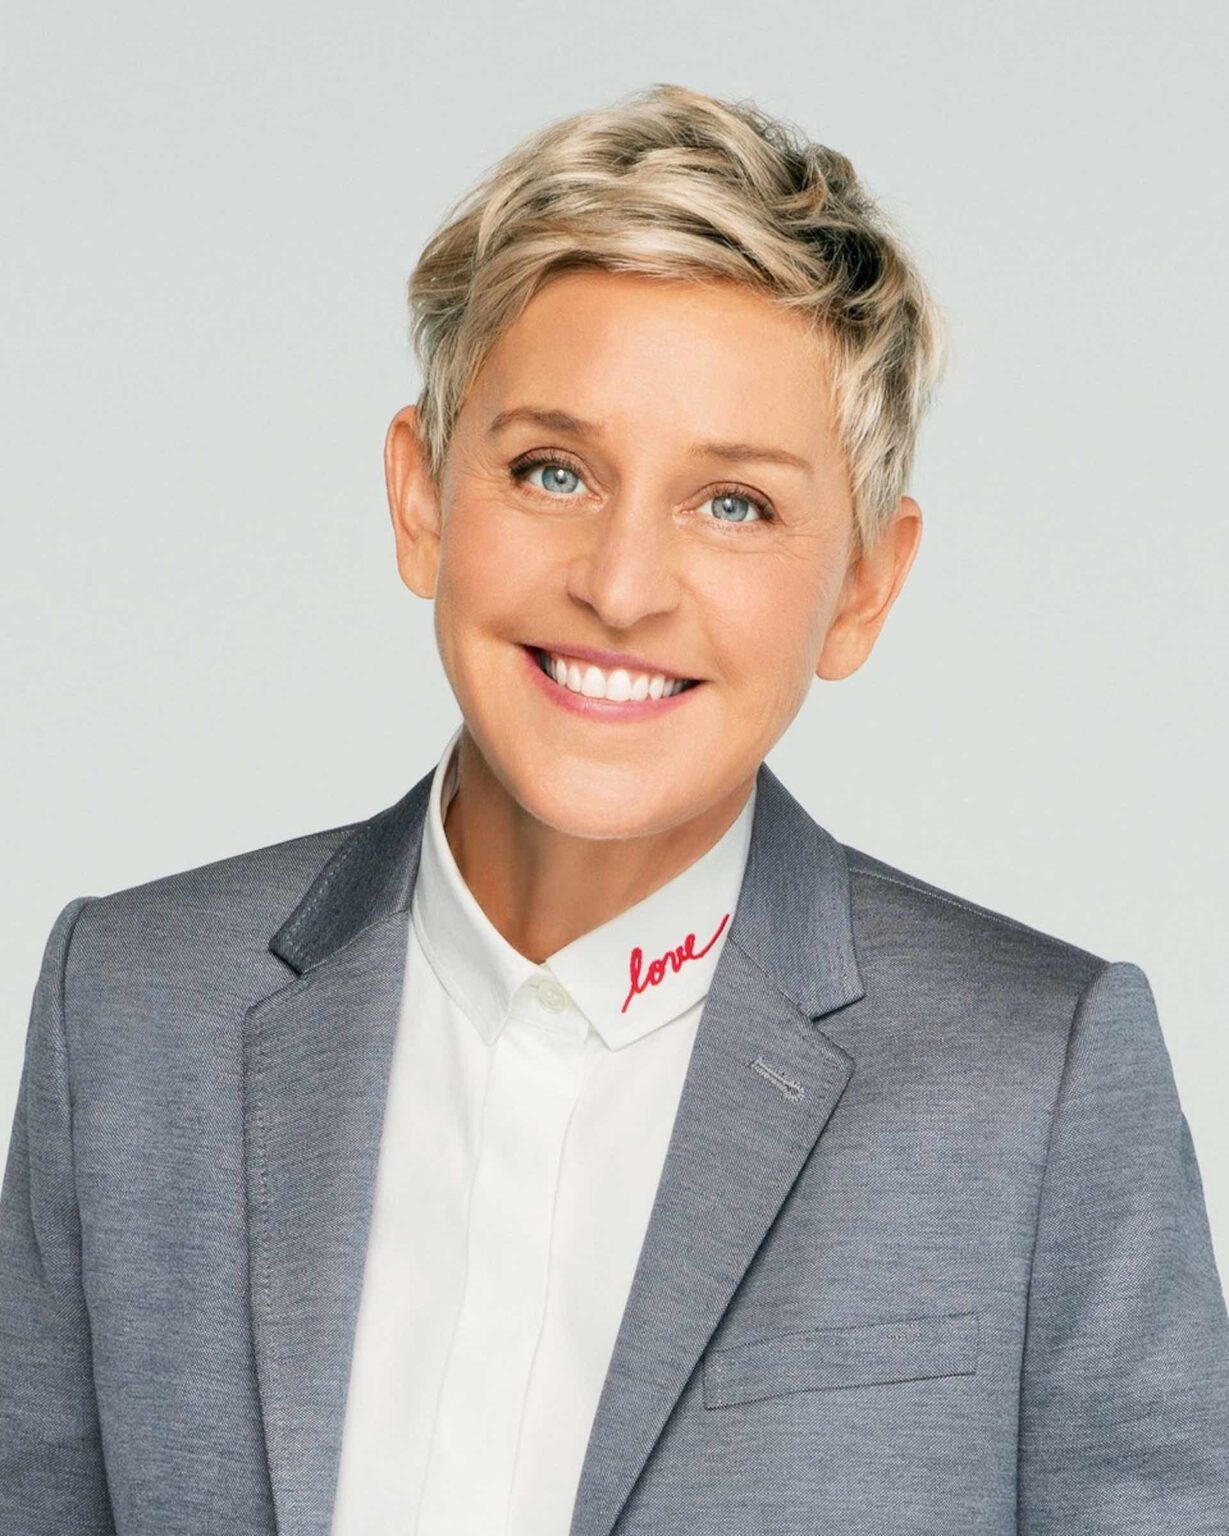 A number of celebrities have supported Ellen DeGeneres, many of whom appeared on her show. Is Ellen mean? Here's what Meghan Markle had to say.